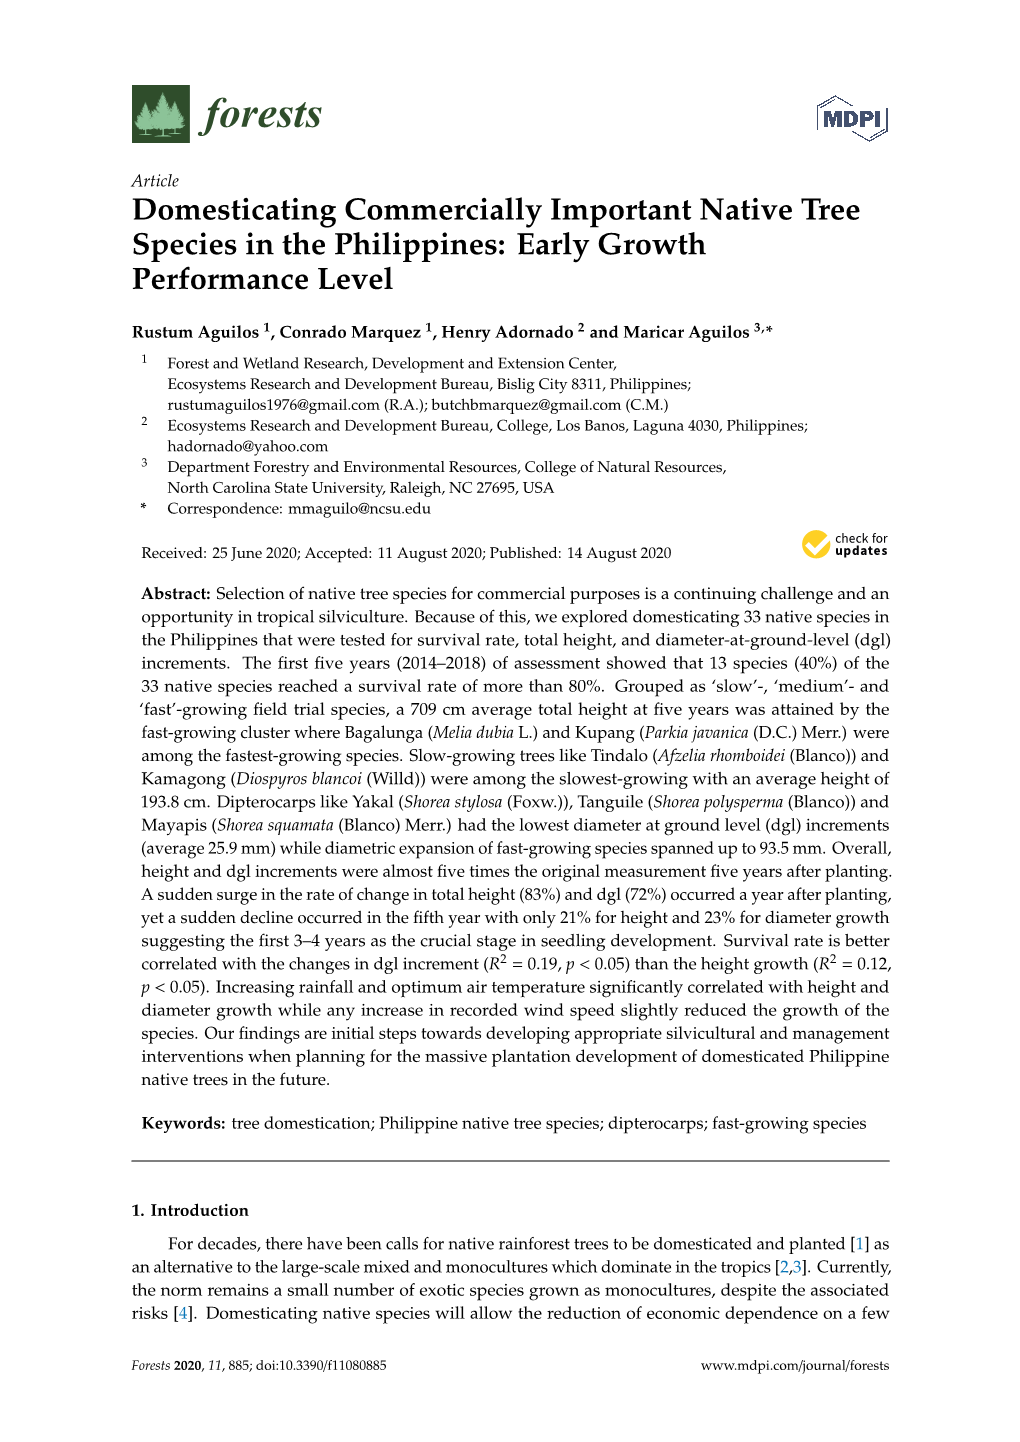 Domesticating Commercially Important Native Tree Species in the Philippines: Early Growth Performance Level